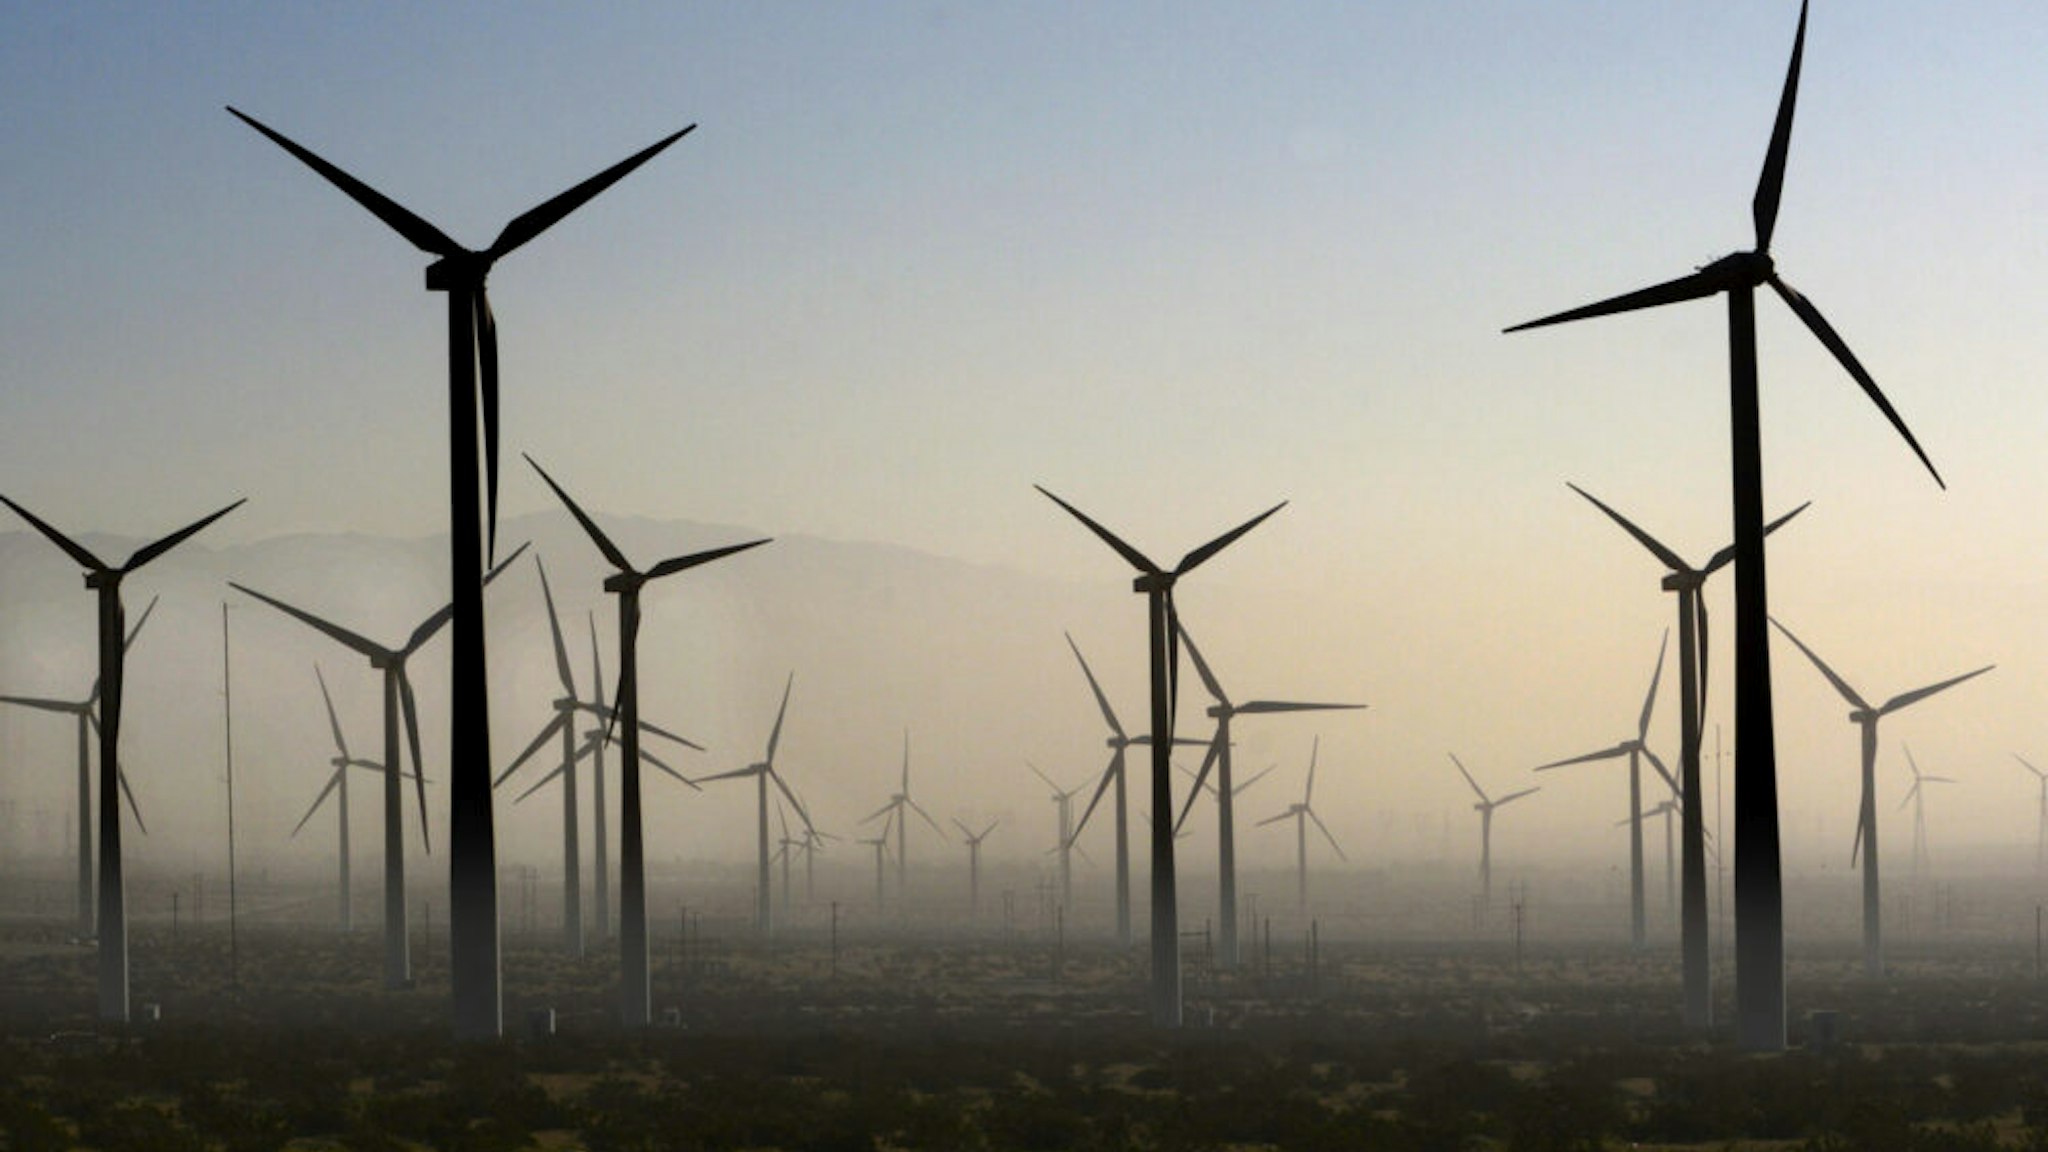 PALM SPRINGS, CALIFORNIA - FEBRUARY 27, 2019: Wind turbines generate electricity at the San Gorgonio Pass Wind Farm near Palm Springs, California, as a dust storm blows through the area. Located in the windy gap between Southern California's two highest mountains, the facility is one of three major wind farms in California.